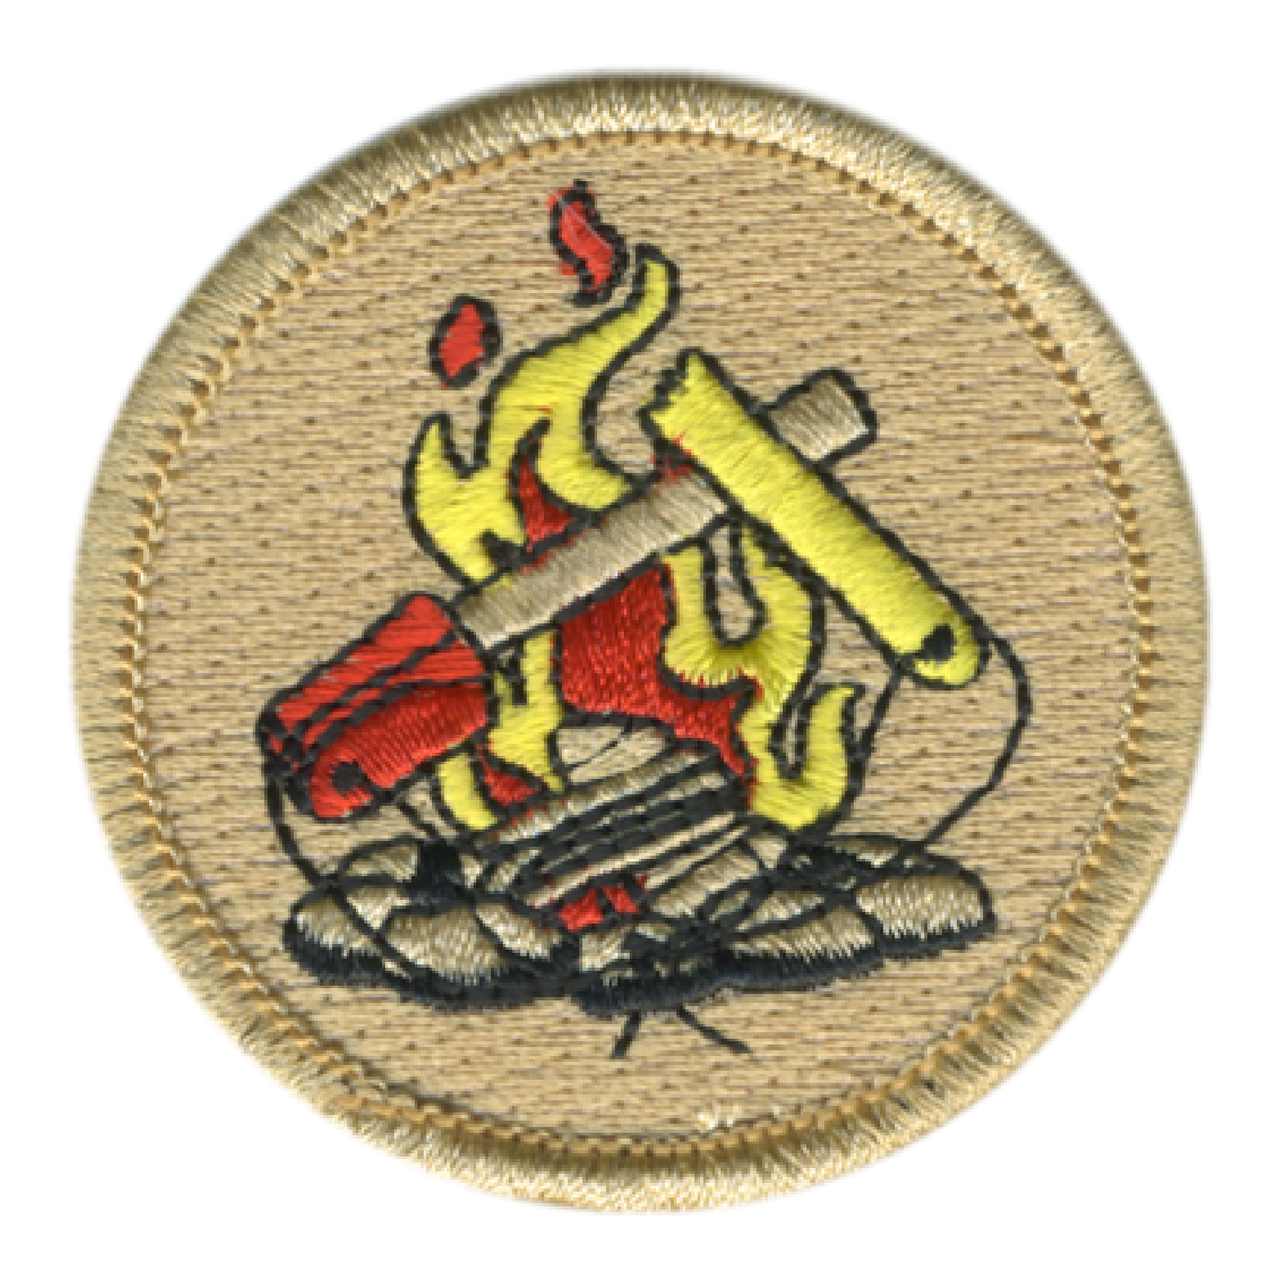 Flint and Steel Campfire Patrol Patch